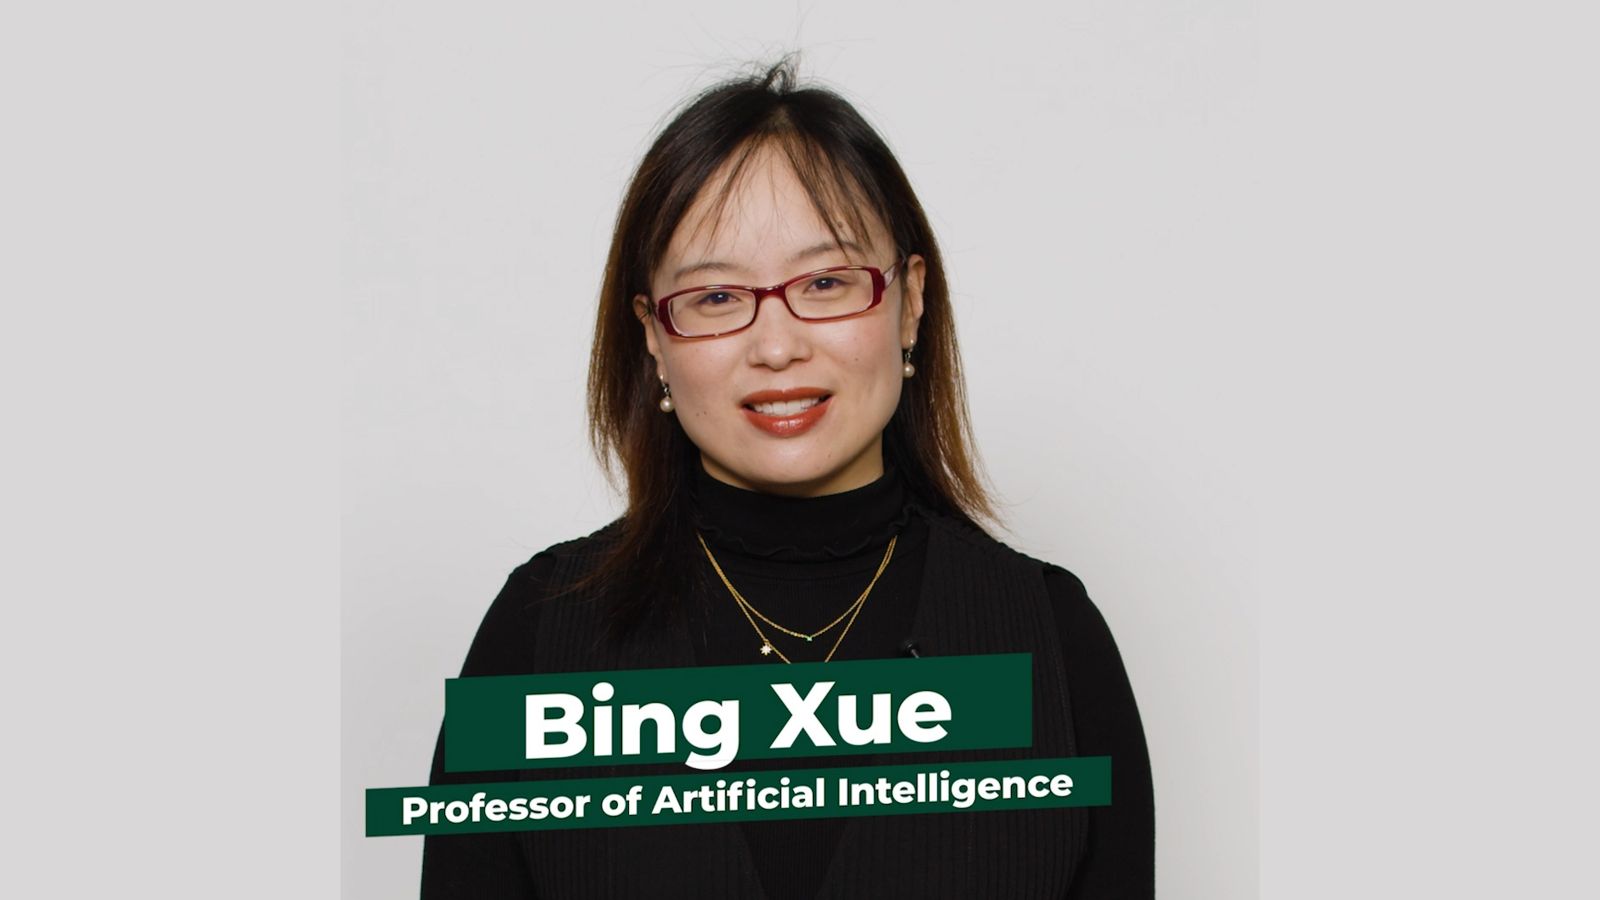 Professor of Artificial Intelligence Bing Xue faces the camera against a white background